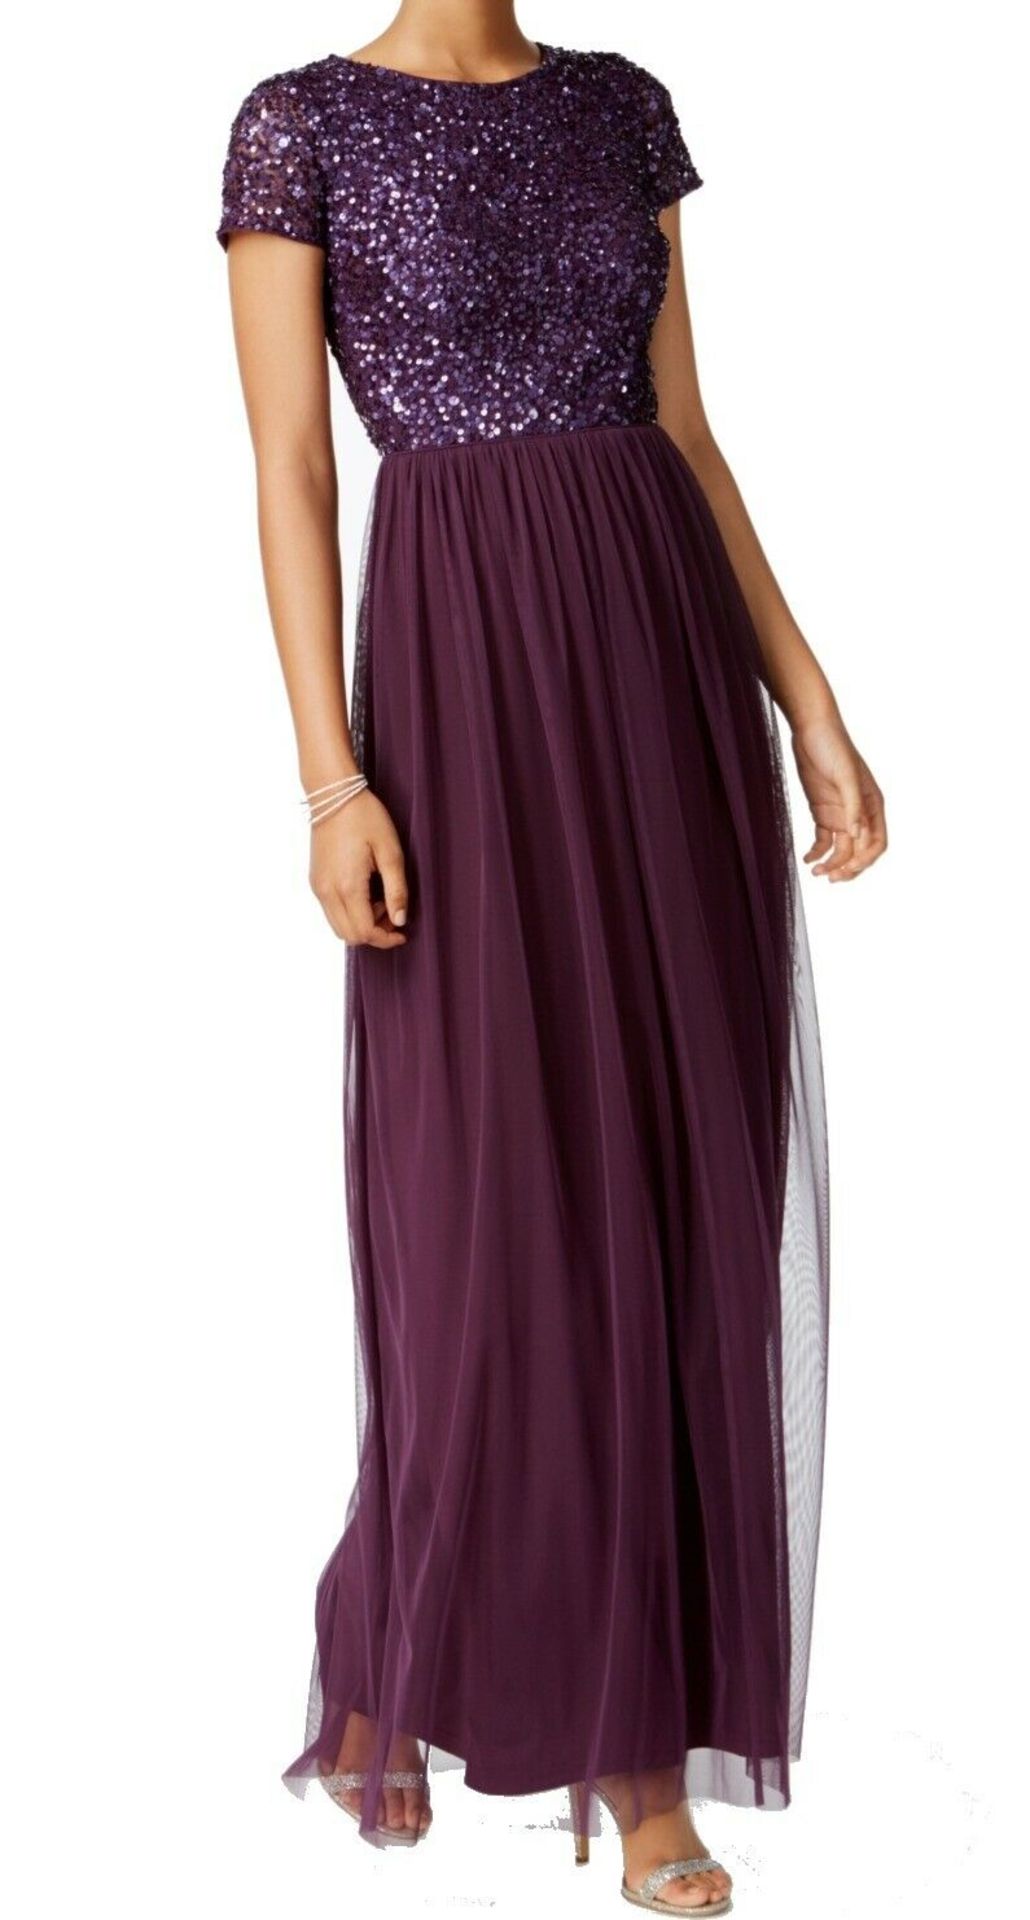 Adrianna Papell Sequined Tulle A-Line Gown Colour Purple Rrp £199 Size 14